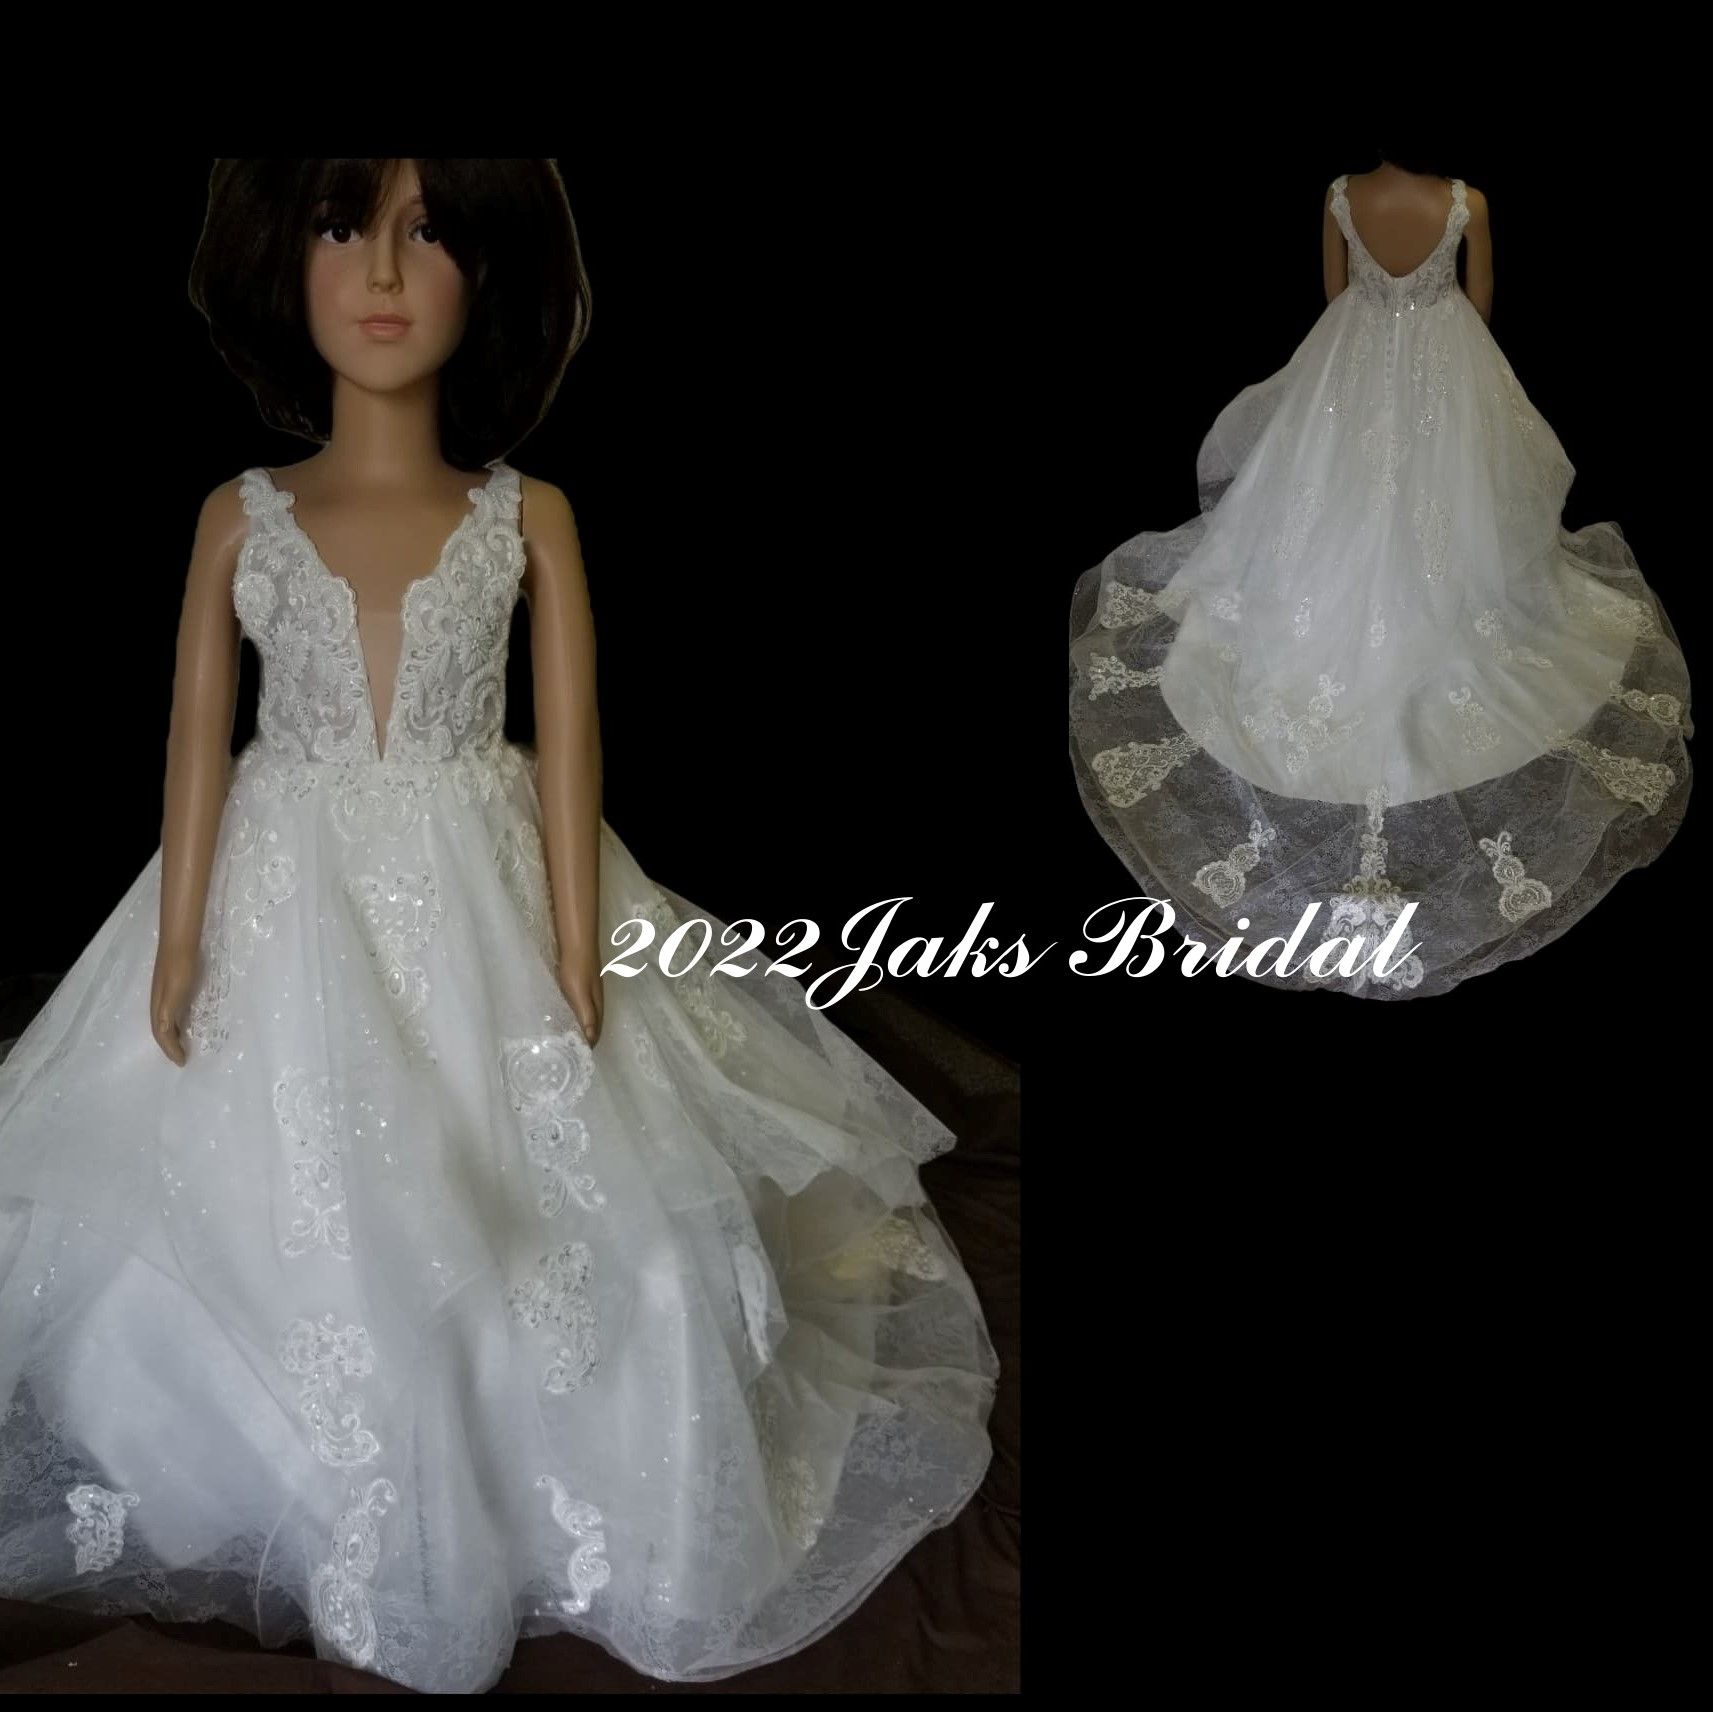 Little girls wedding dress with hand beaded crystals and pearls adds elegant sparkle to the bold ball gown of this designer flower girl dress. 